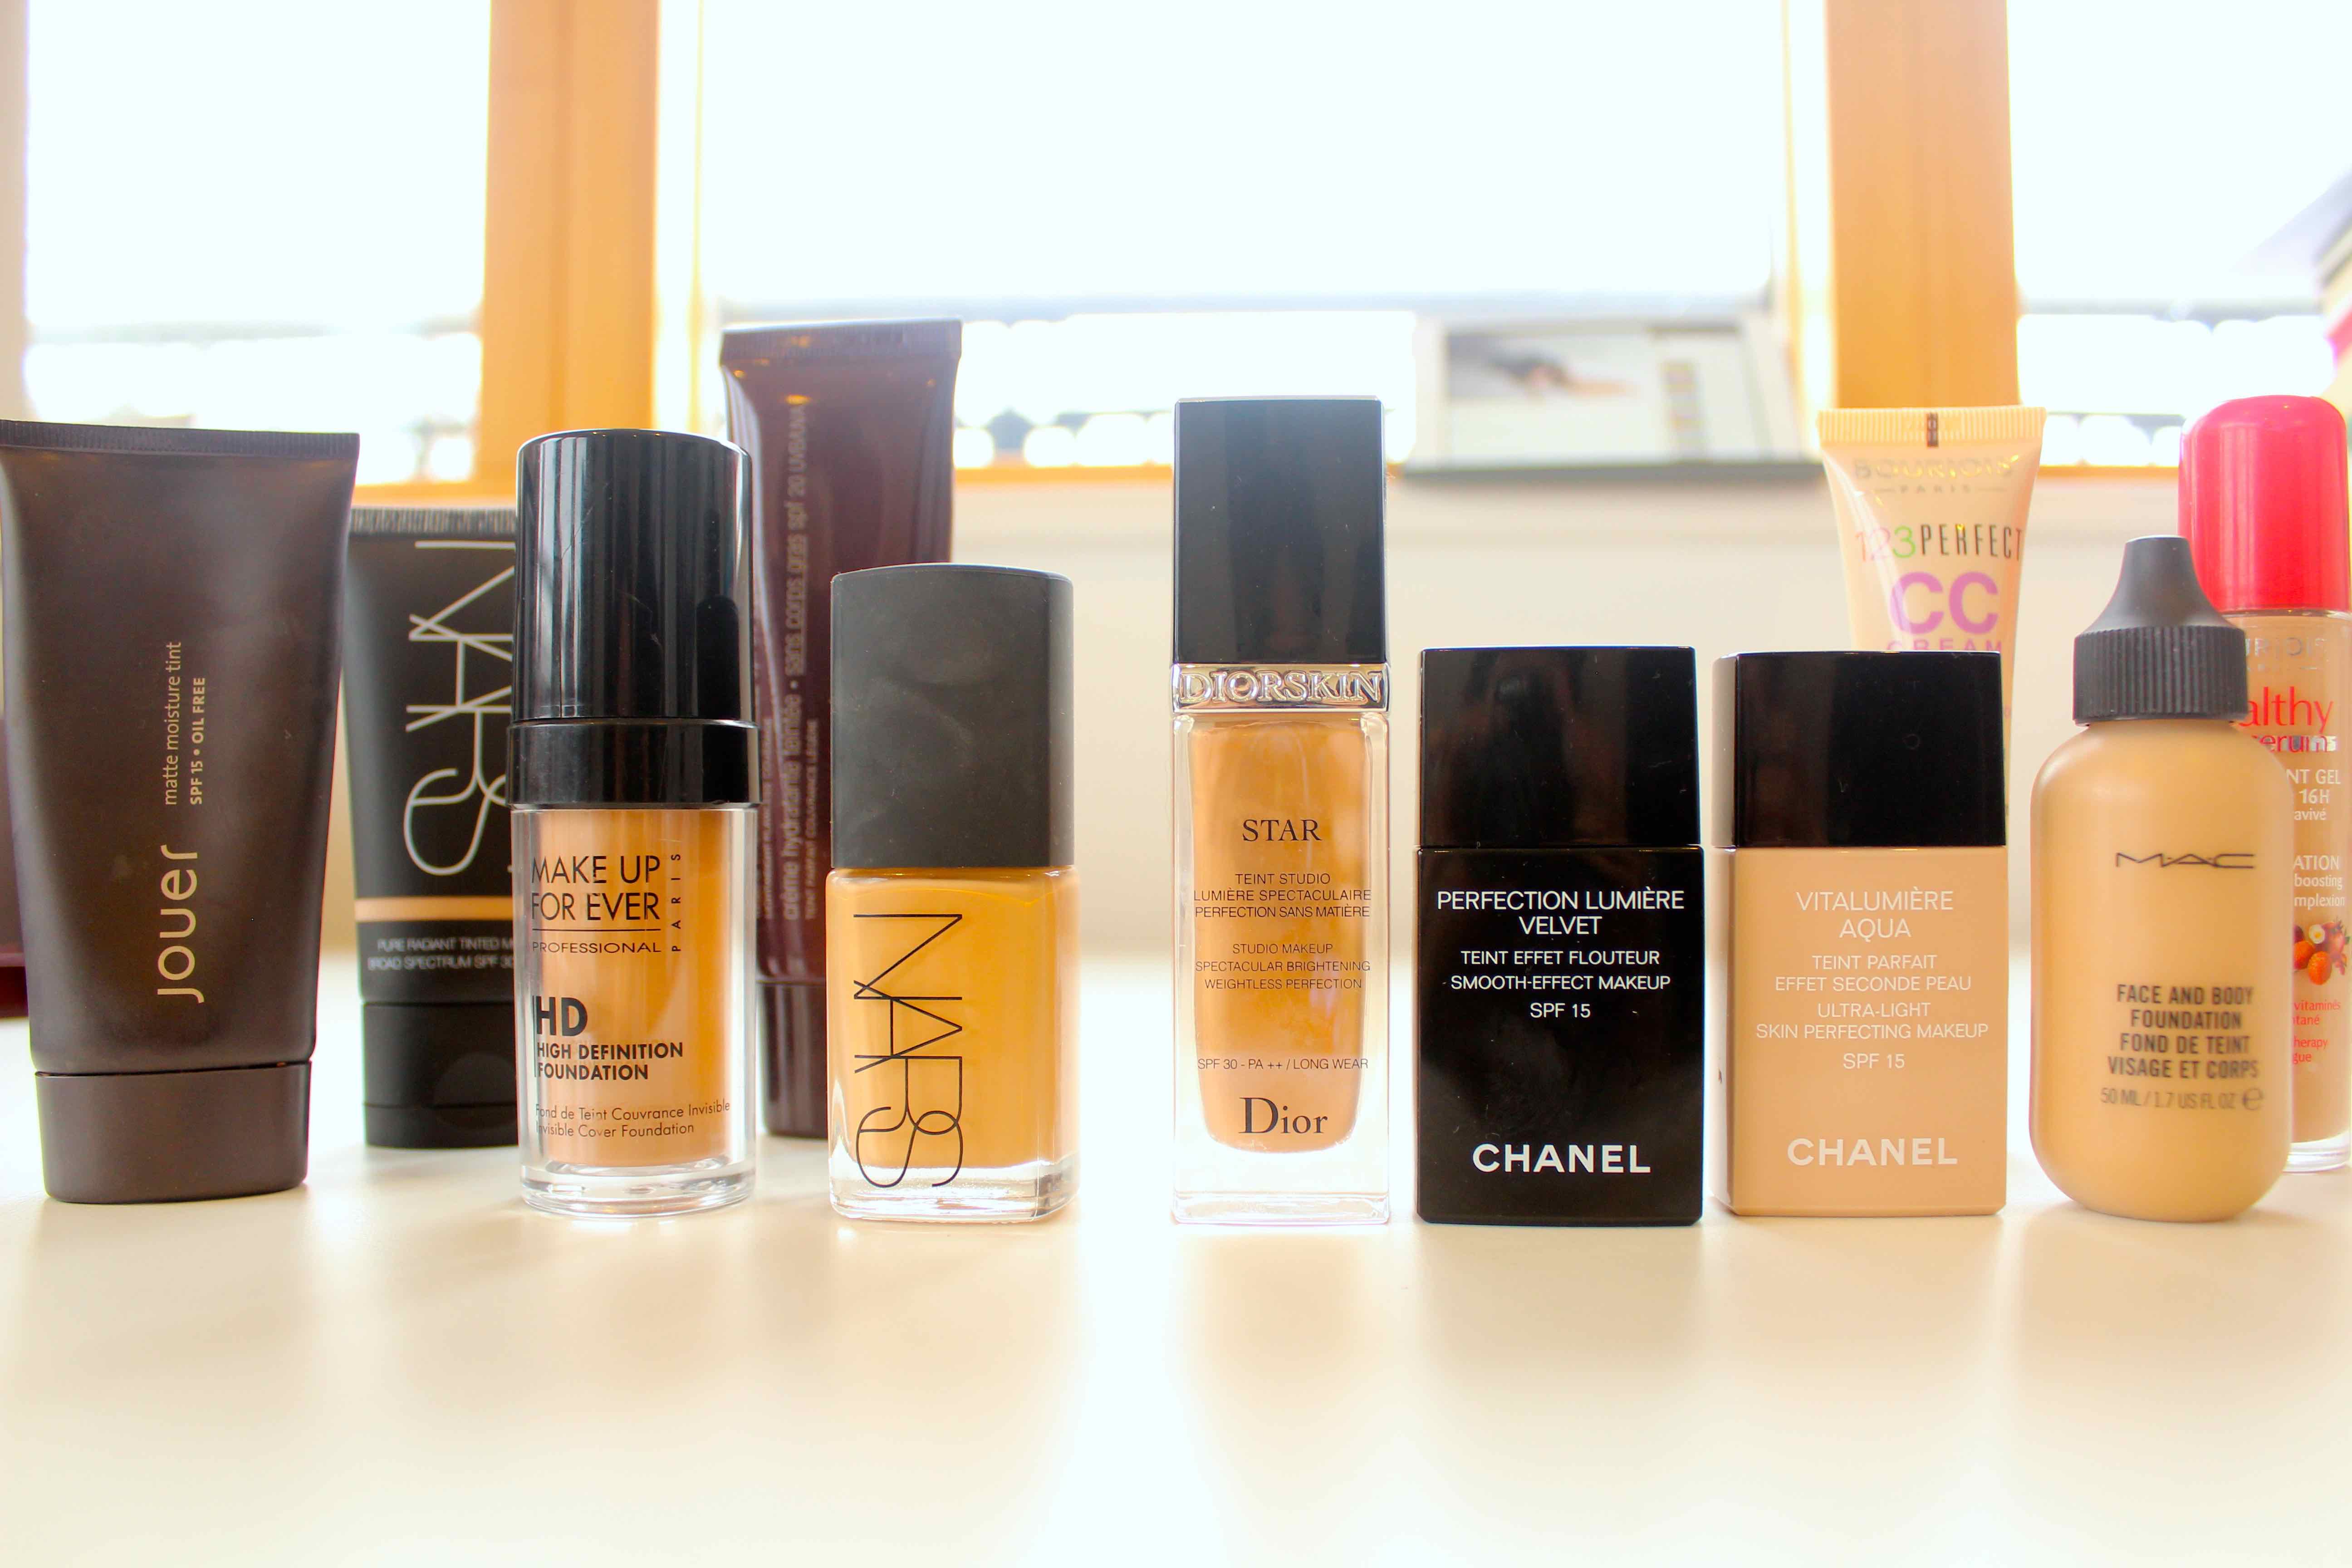 Your existing foundations/concealers